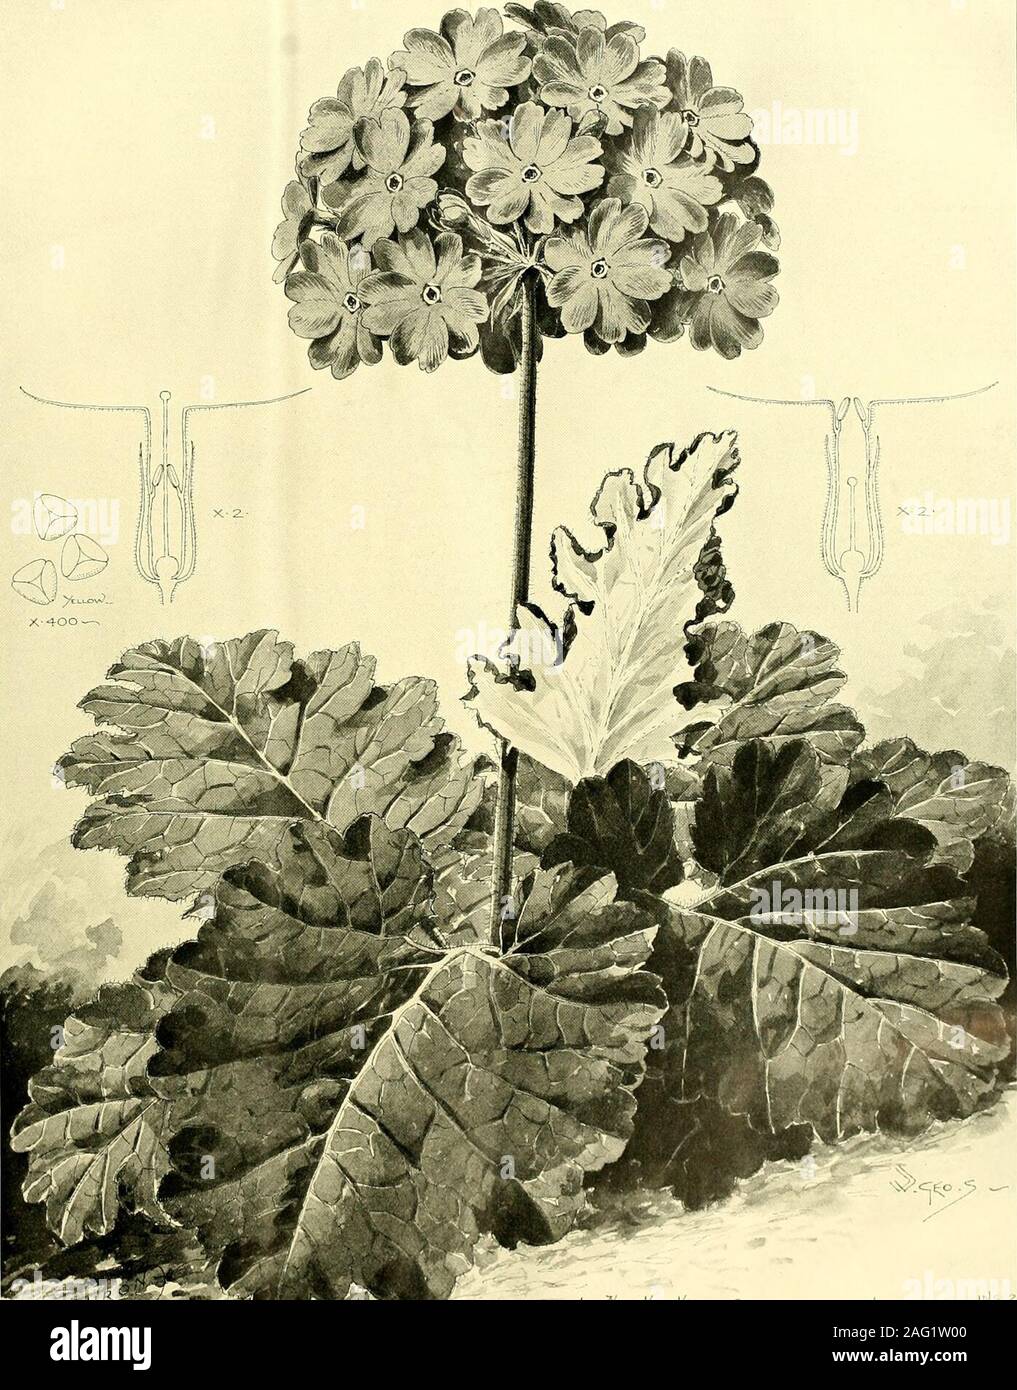 . The Gardeners' chronicle : a weekly illustrated journal of horticulture and allied subjects. A specimen of C. Golden staged an attractive group of foliage plants. Thegroup, although arranged somewhat formally, wasnevertheless pleasing, the colours of the various sub-jects being well developed. Two large plants of Dra-caena Victoria were used as corner subjects for thegroup, the foreground being composed of small plantsof Caladiums, Codiaeums (Croton-^), Ficus repens va-riegata, &c. Alocasias were prominent, includingA. mortefontainensis, and the lighter - coloured va-riety A. argyreia. A pla Stock Photo